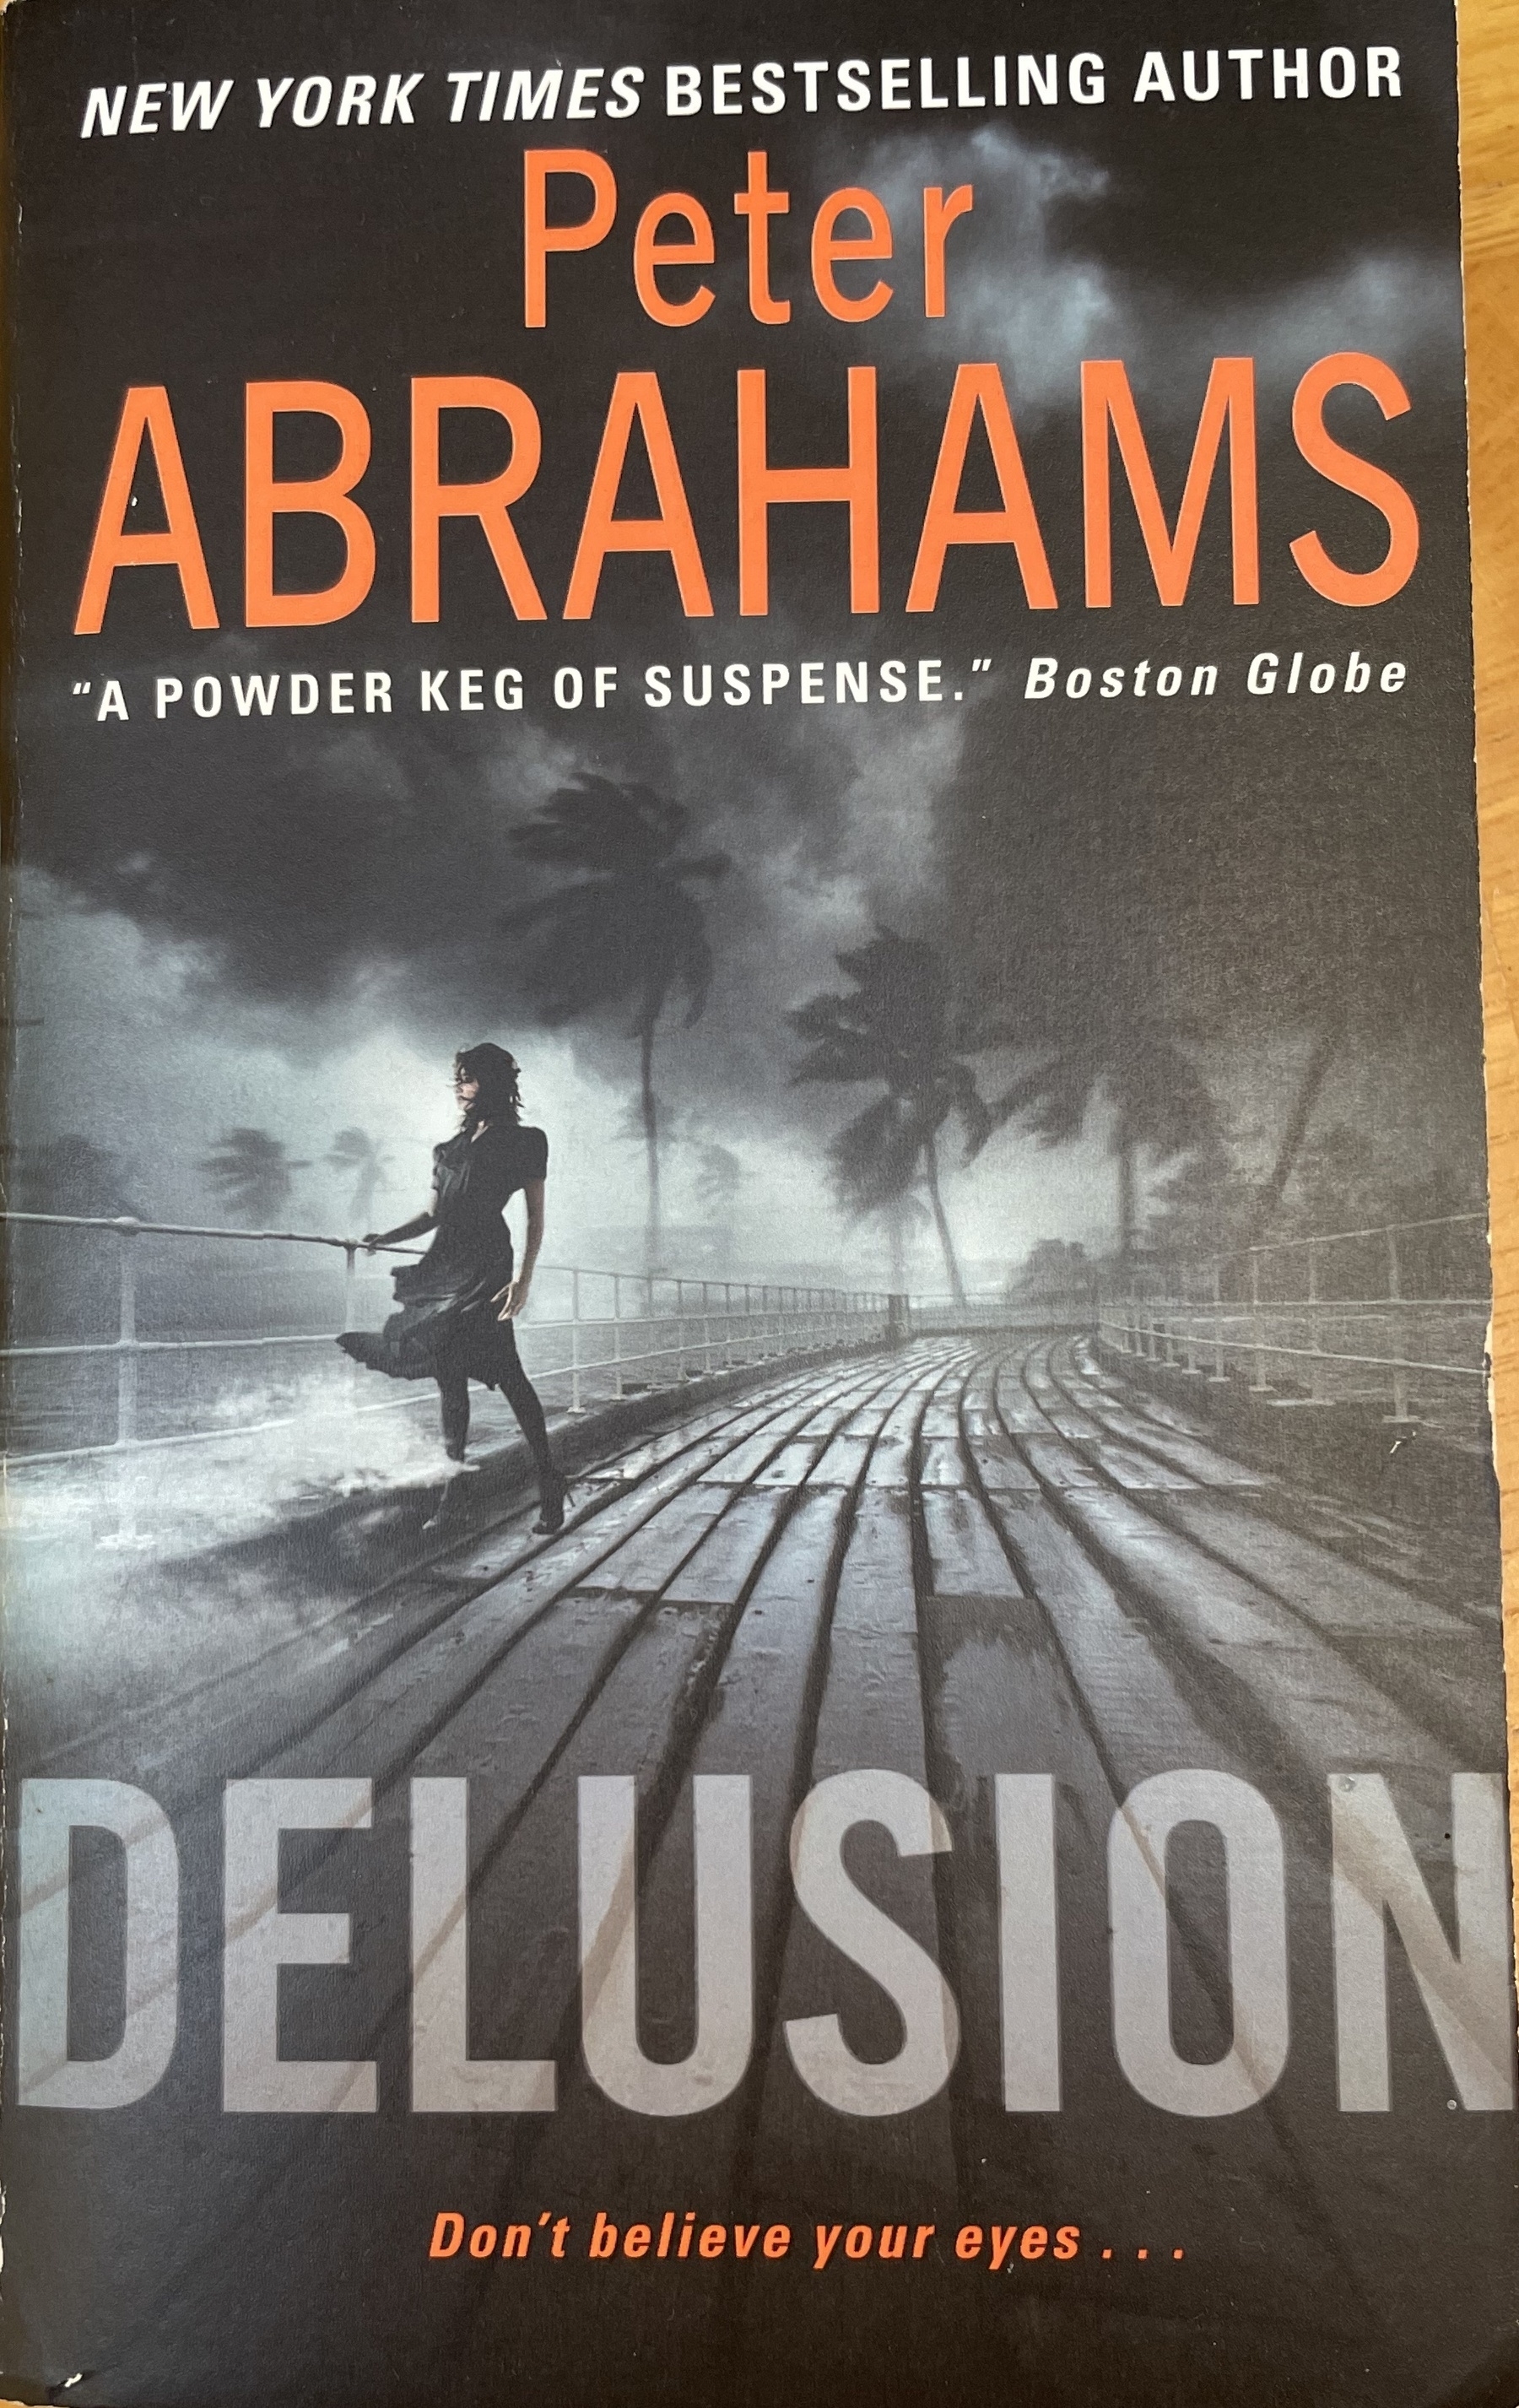 Cover illustration of paperback edition of Delusion